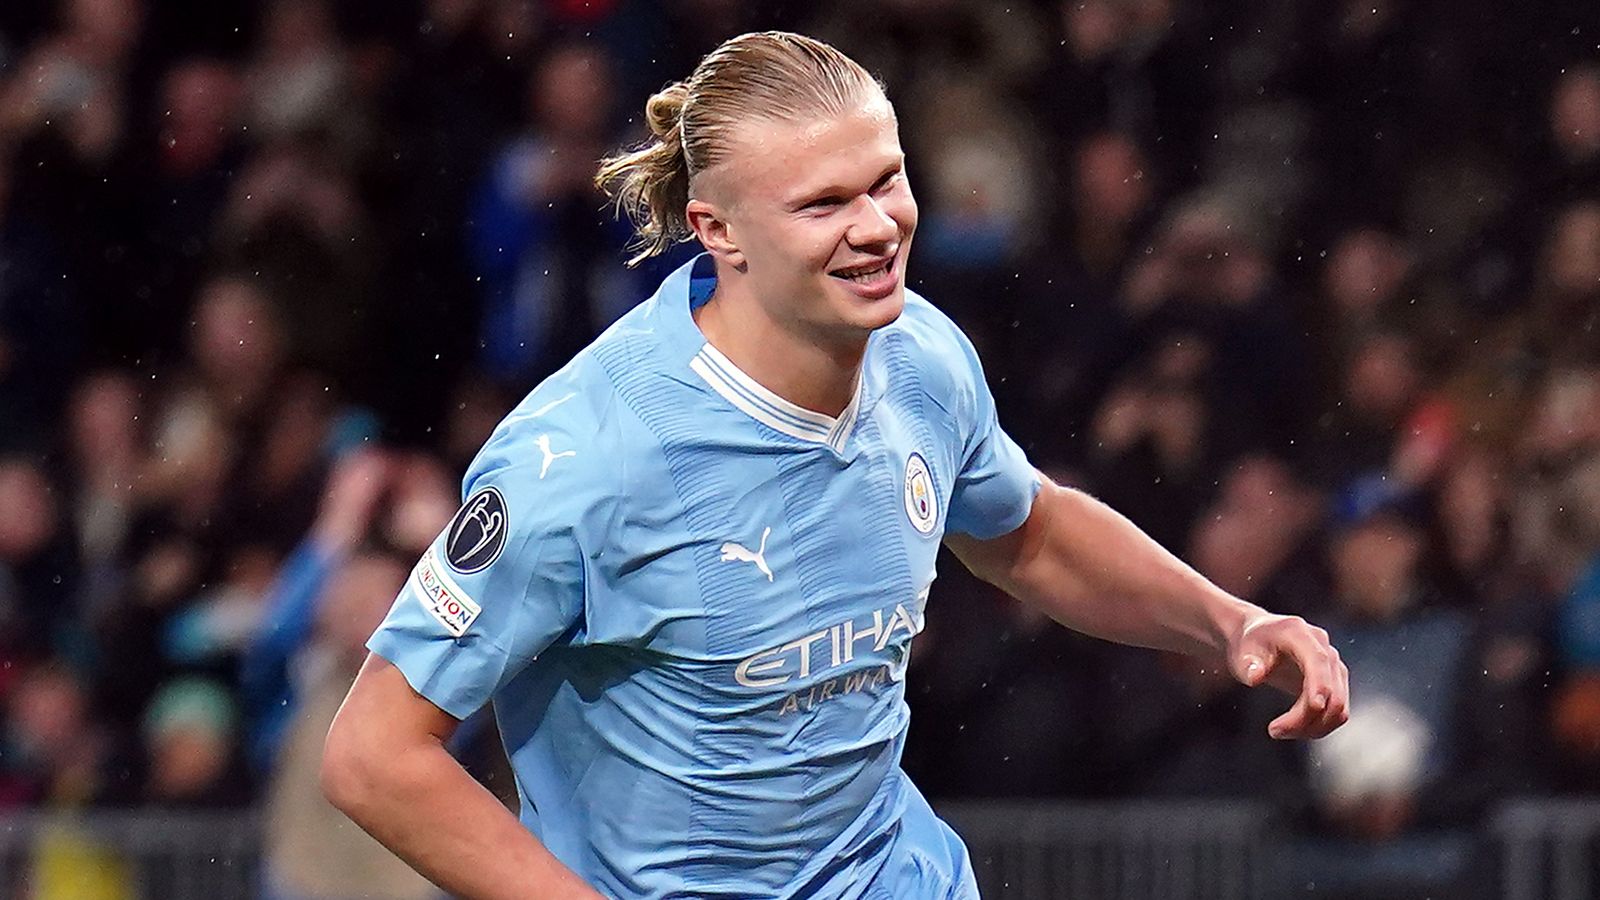 UEFA Champions League: Erling Haaland double seals Man City win at Young Boys